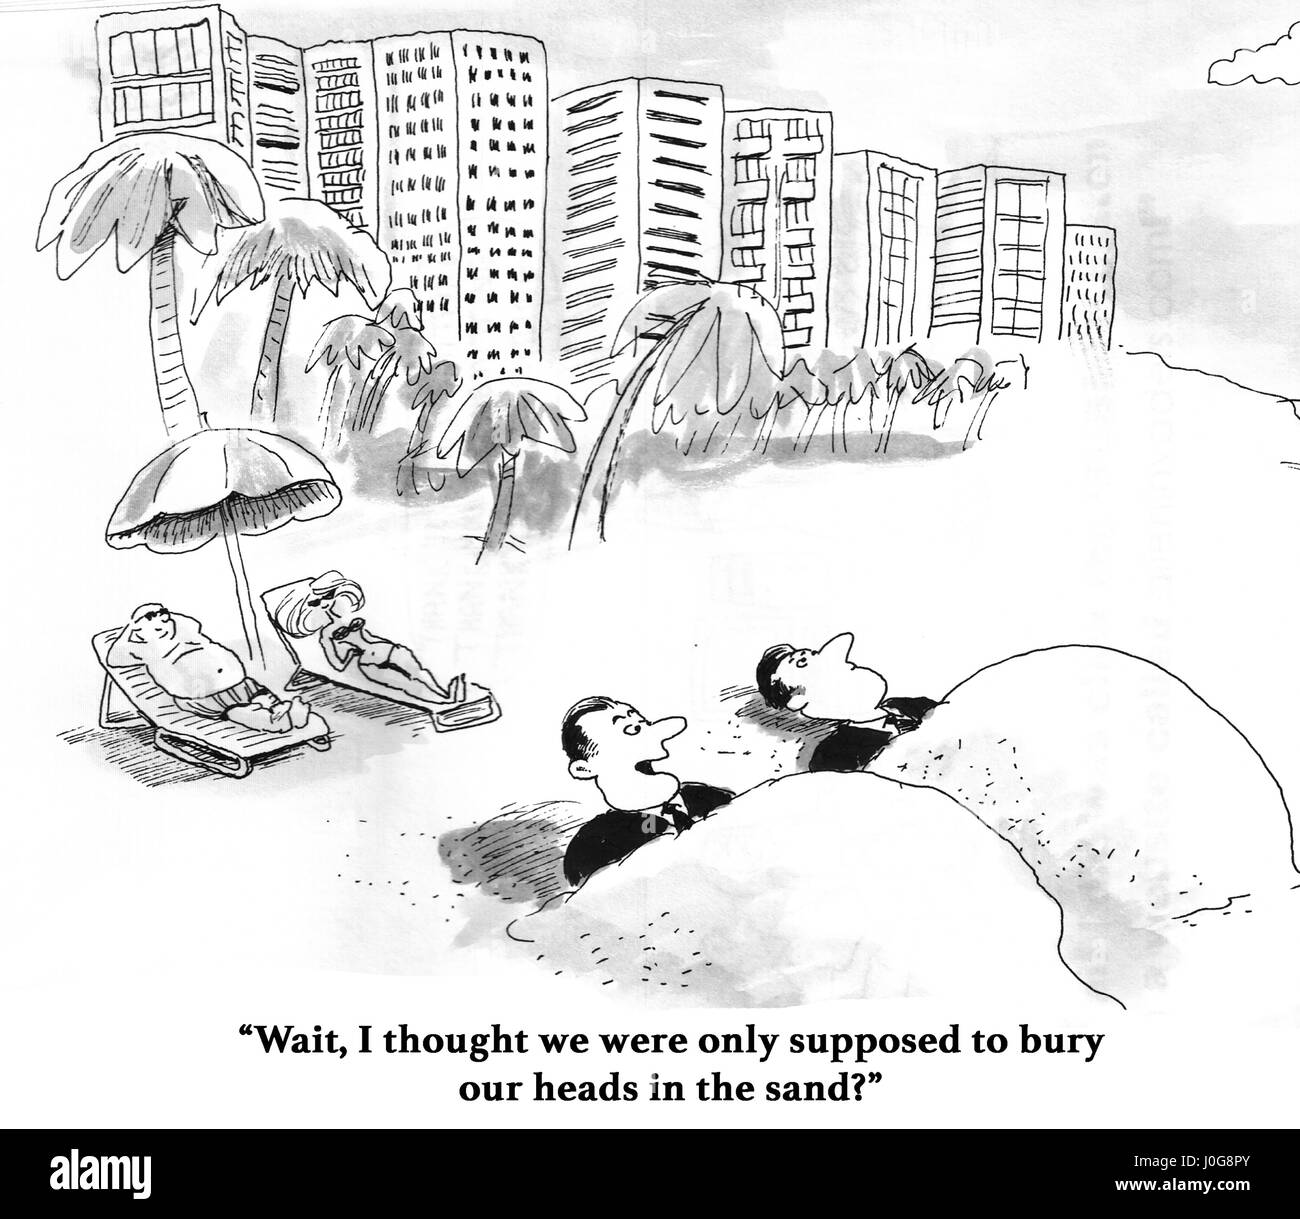 Business cartoon about a doofus who buried his body, not his head, in the sand. Stock Photo